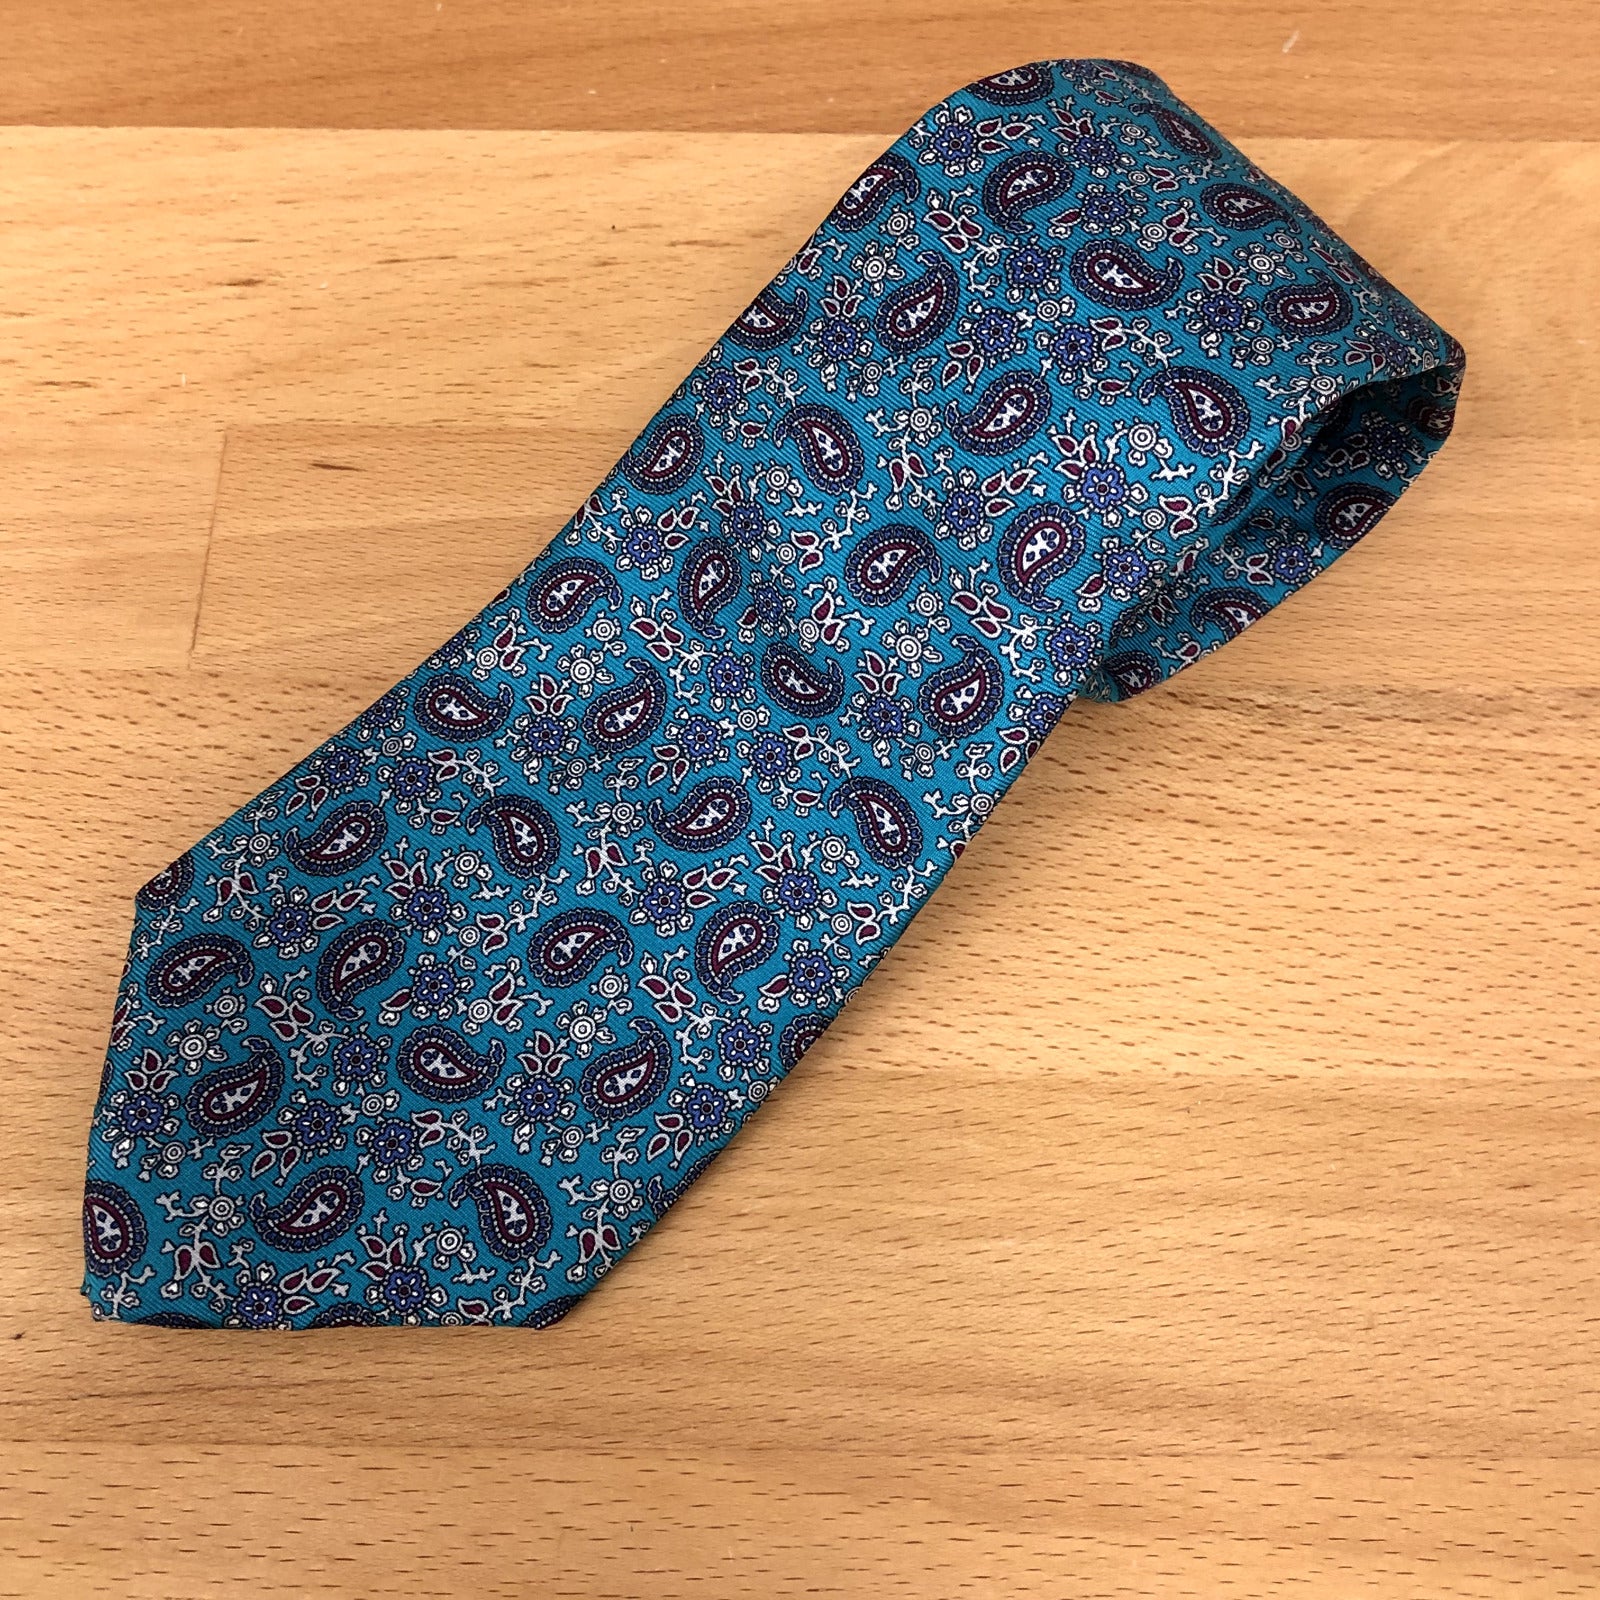 New Christian Dior Teal Small Paisley Print Woven in Italy All Silk Tie Mens